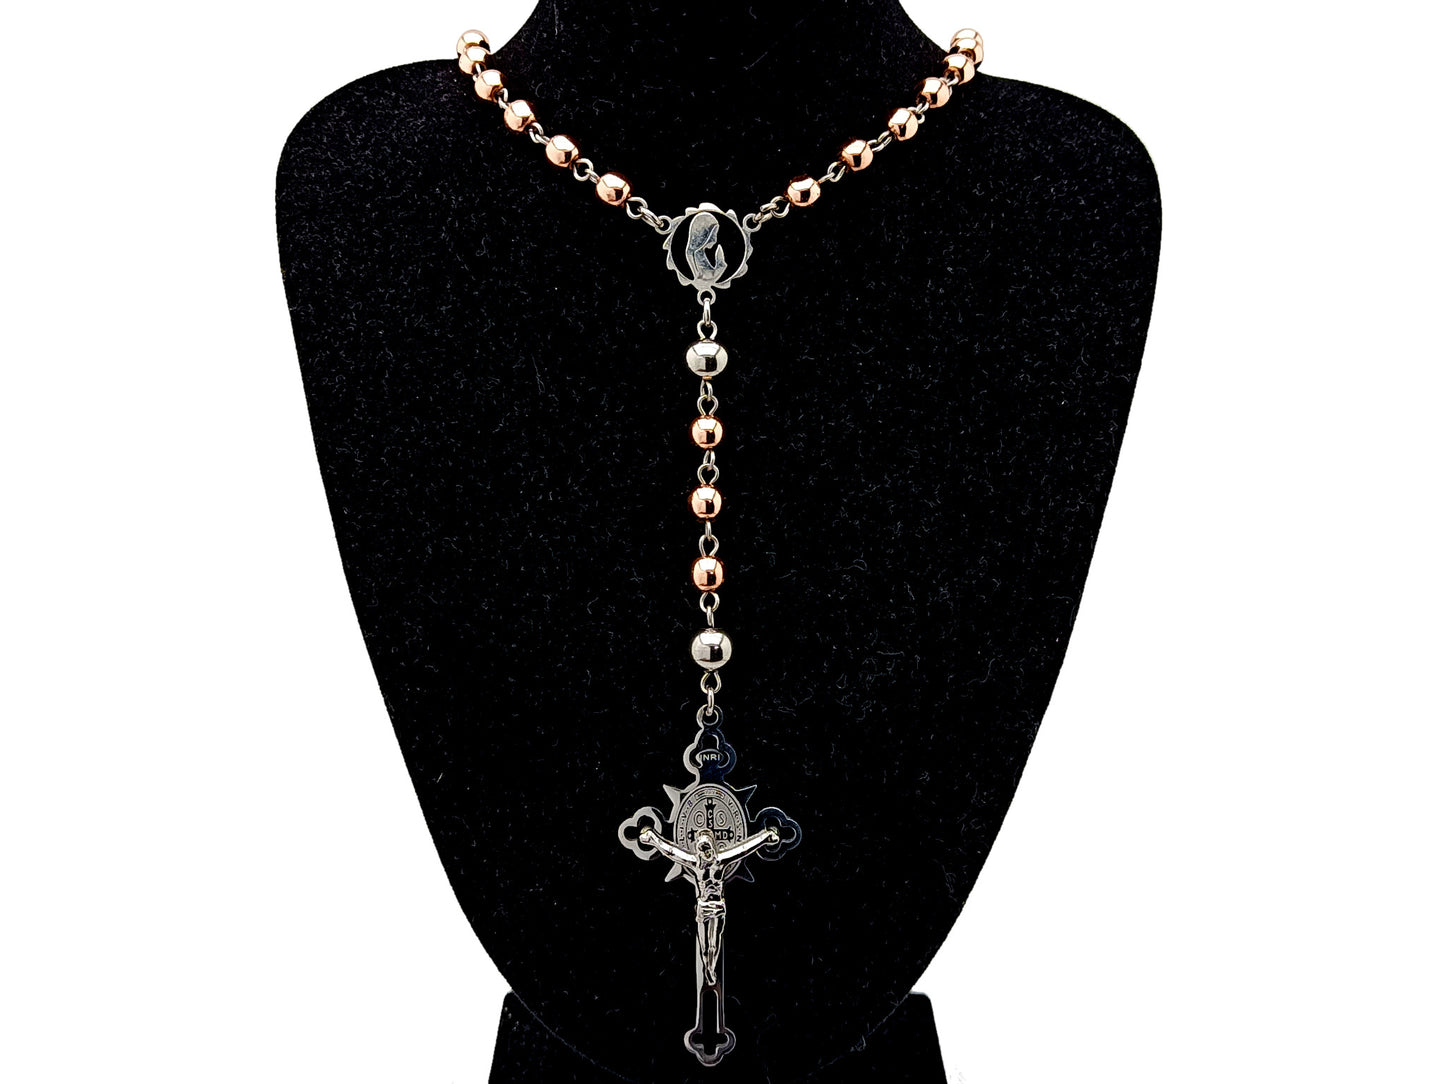 Virgin Mary unique rosary beads necklace with hematite gemstone and stainless steel beads and engraved Saint Benedict stainless steel crucifix.